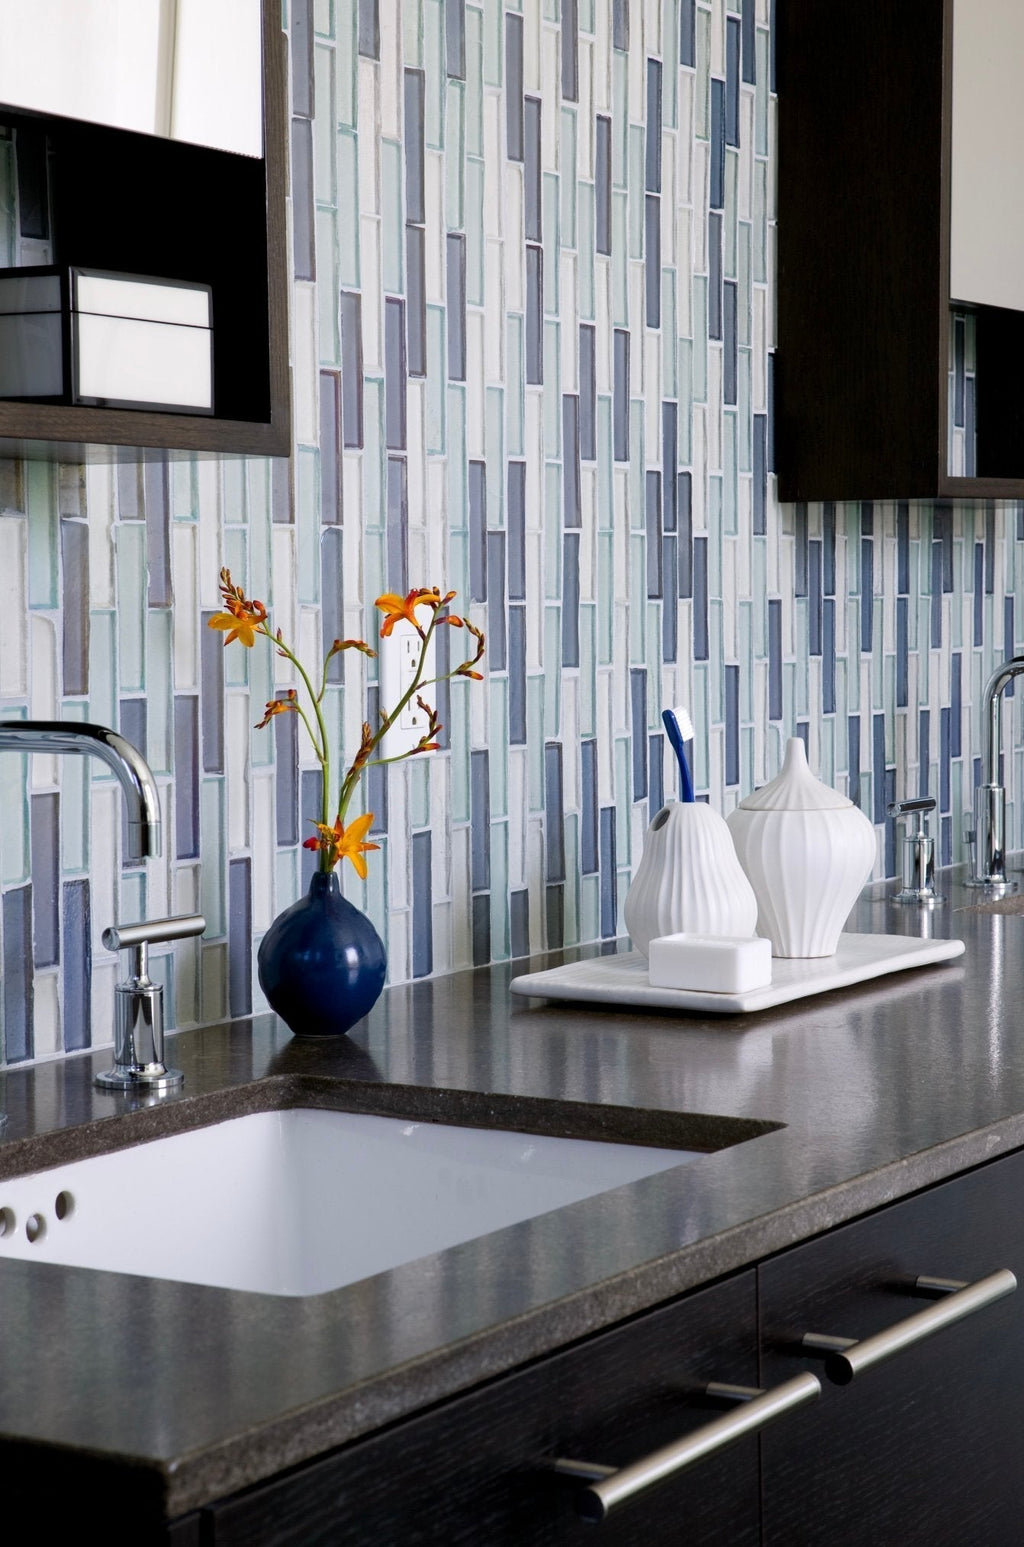 All About Mosaic Tiles